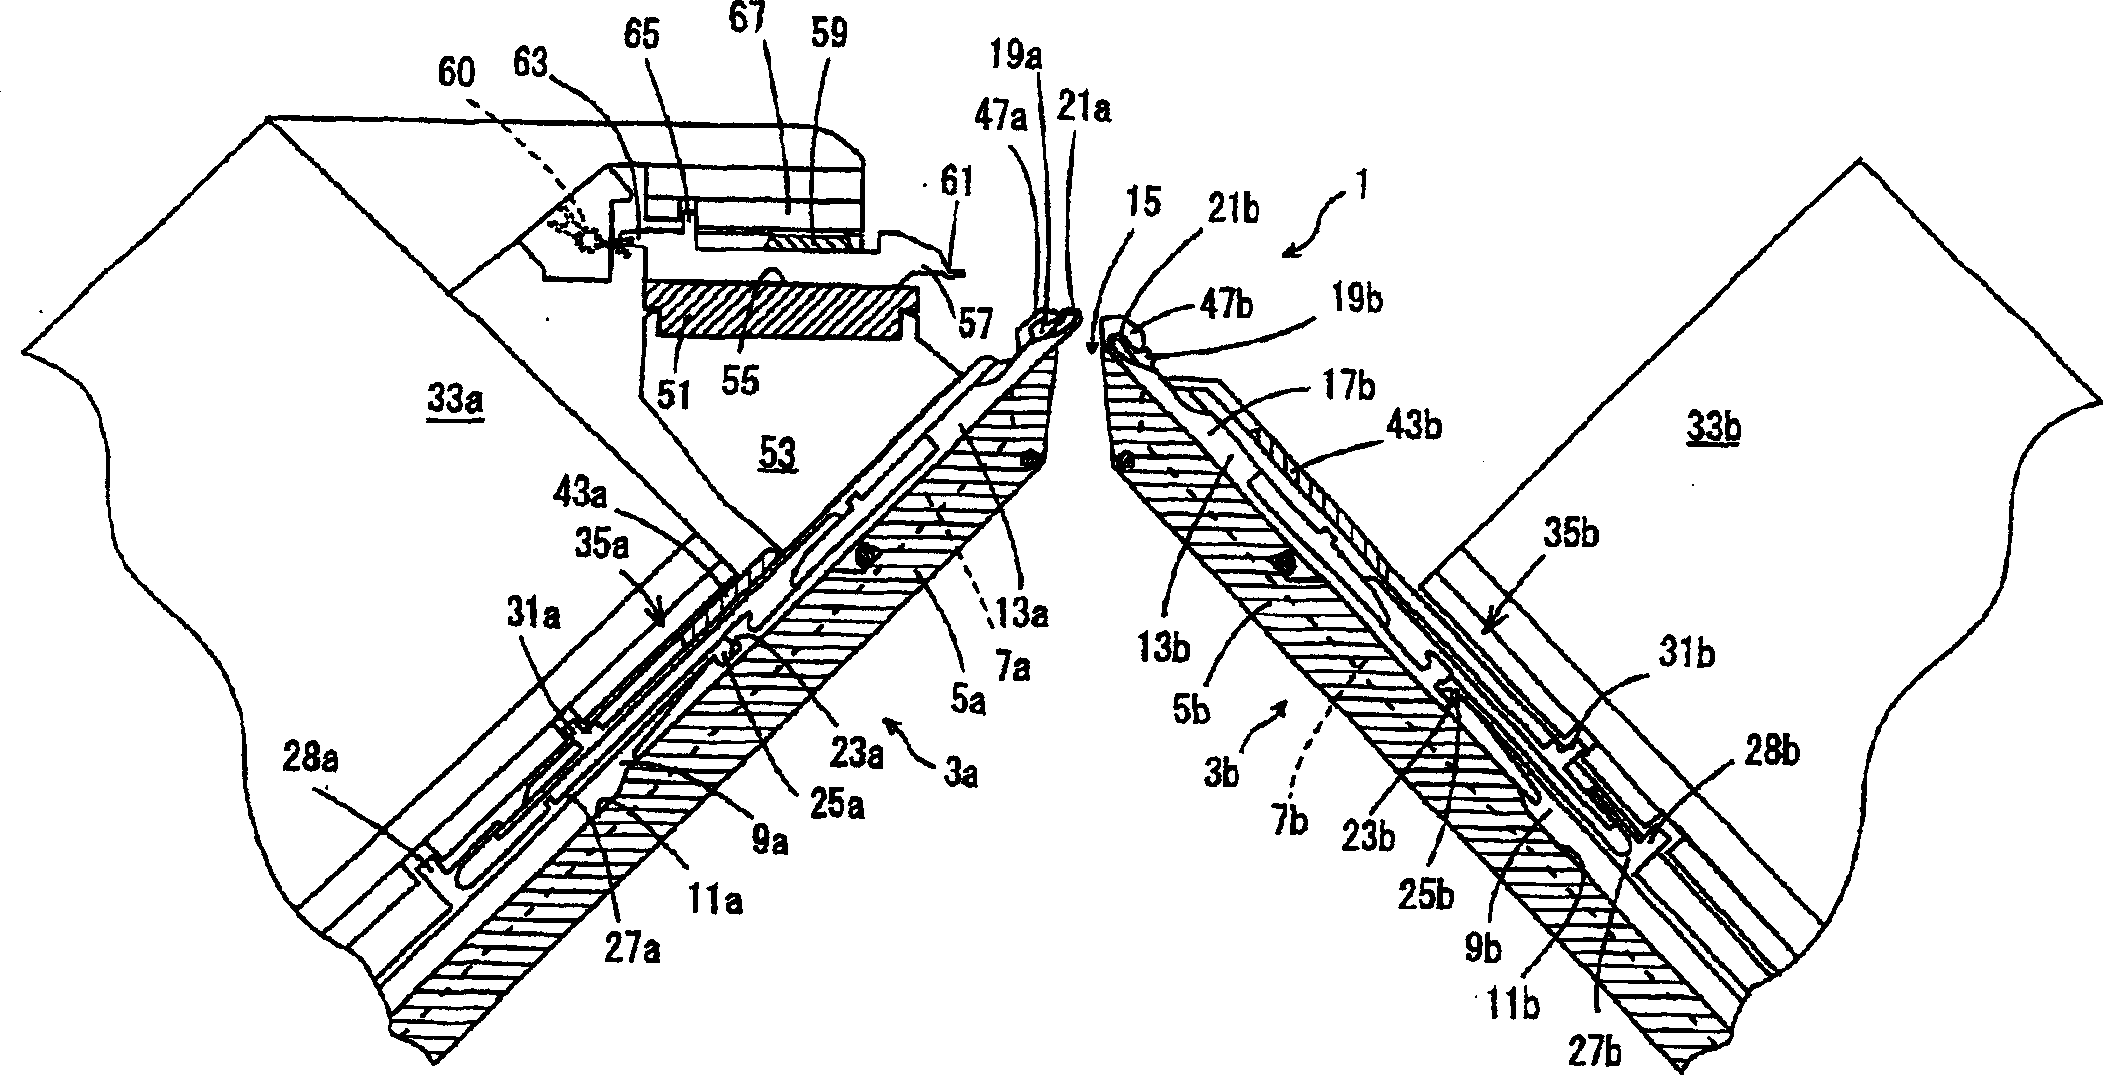 Weft knitting machine with transfer mechanism and transferring method